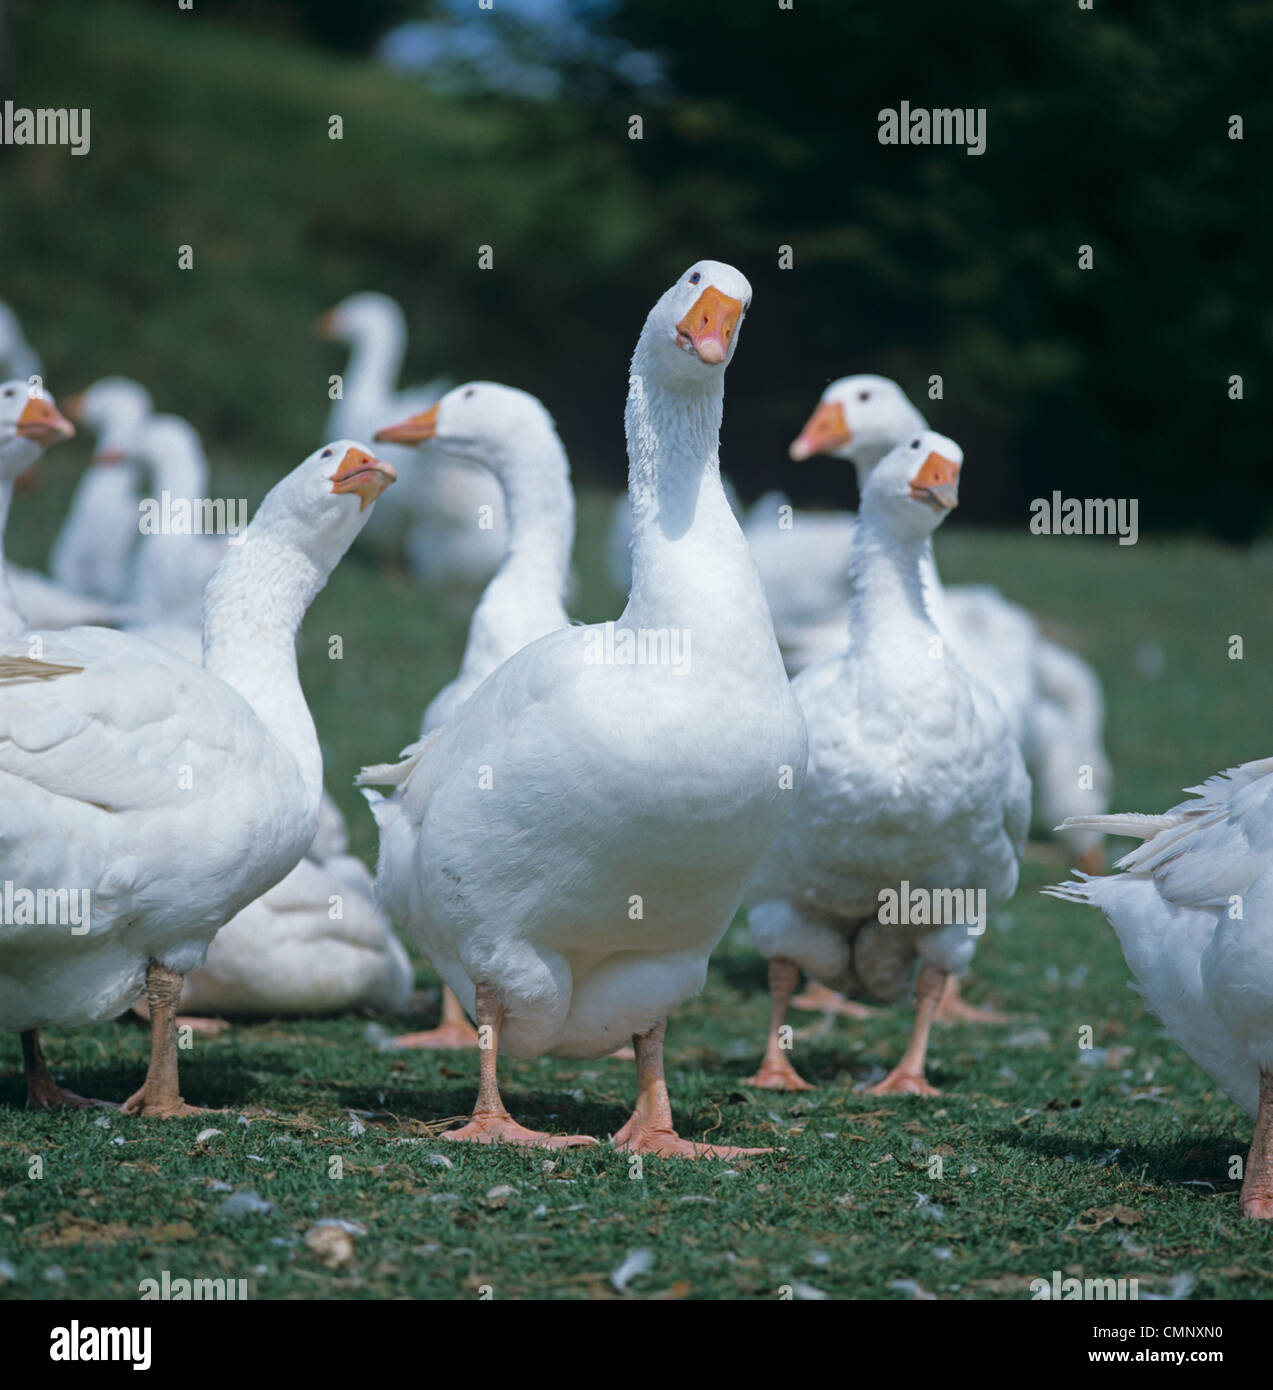 White geese staring curiously on grass, Dorset Stock Photo